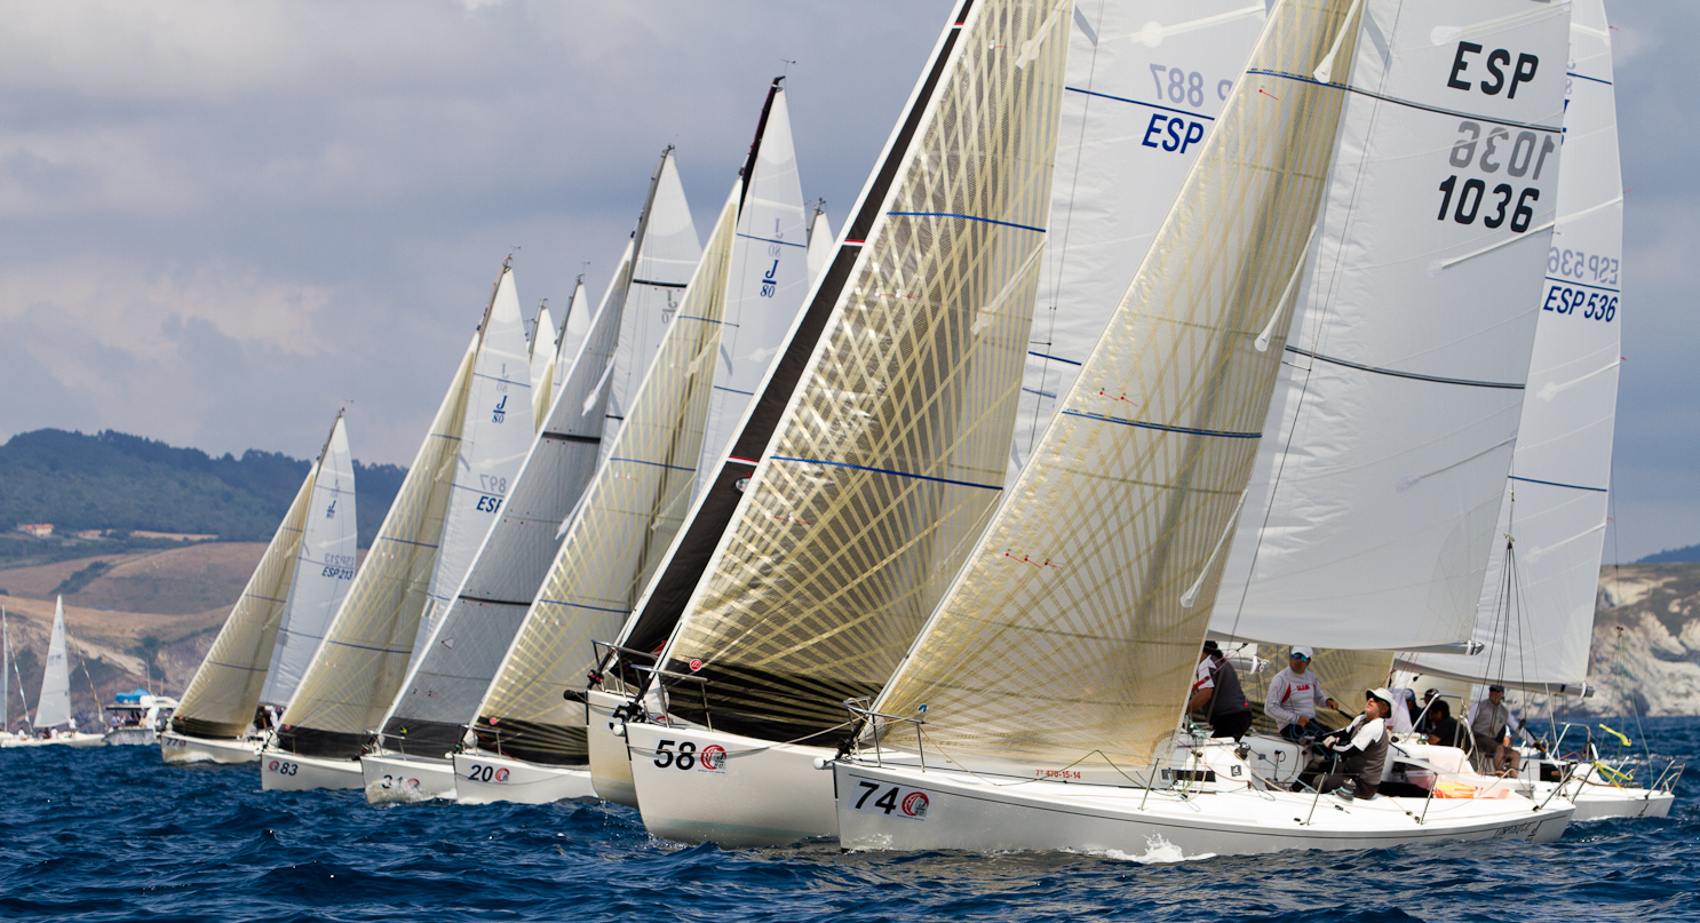  J/80  World Championship 2019  Bilbao ESP  Day 3, tight fight on top of the rankings